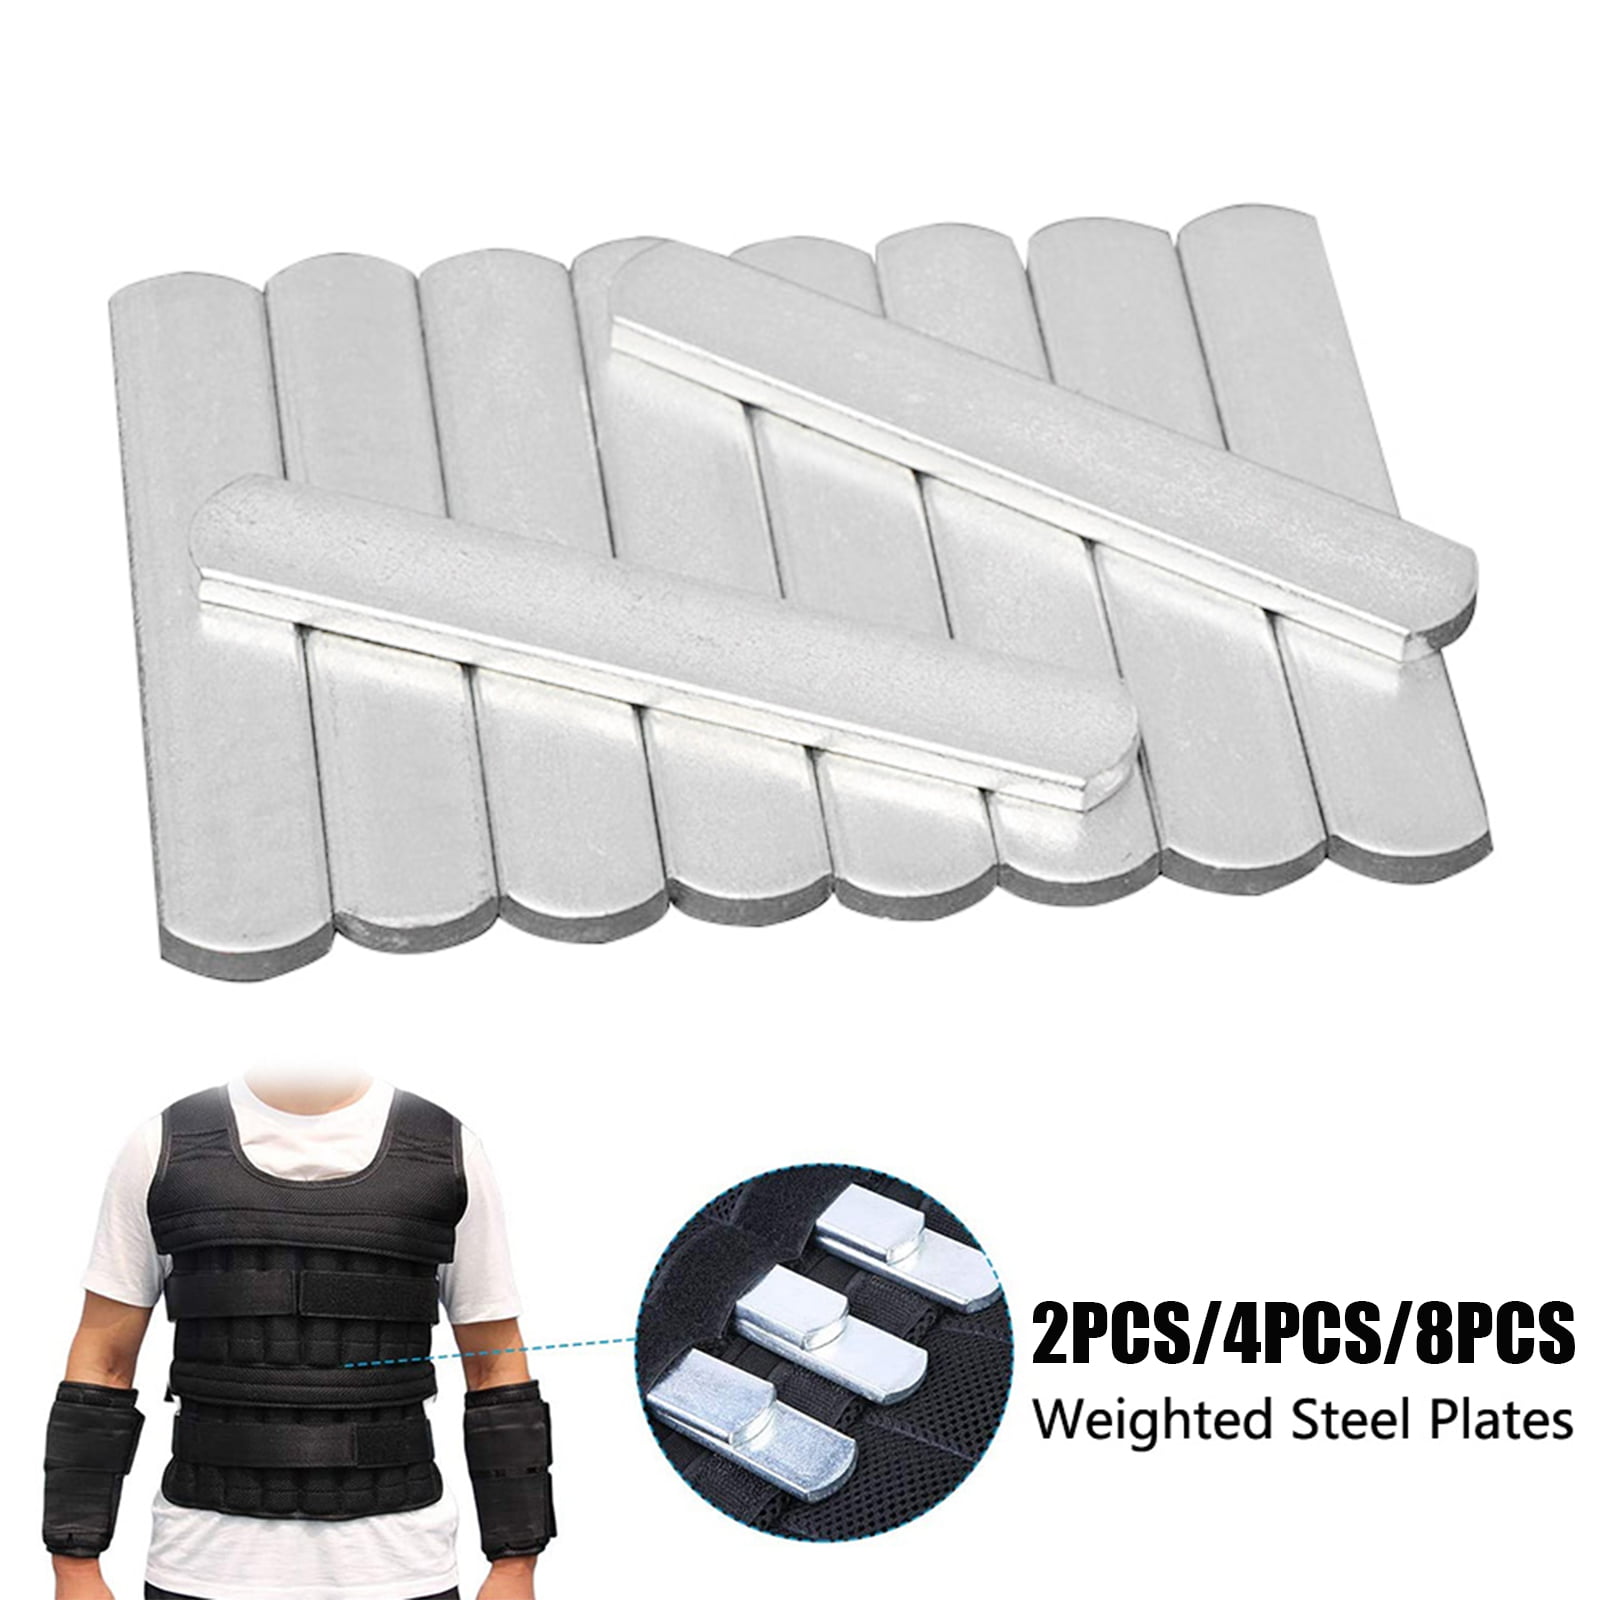 Steel Plates for Weighted Vest Strength Training Plates for Fitness 8pcs